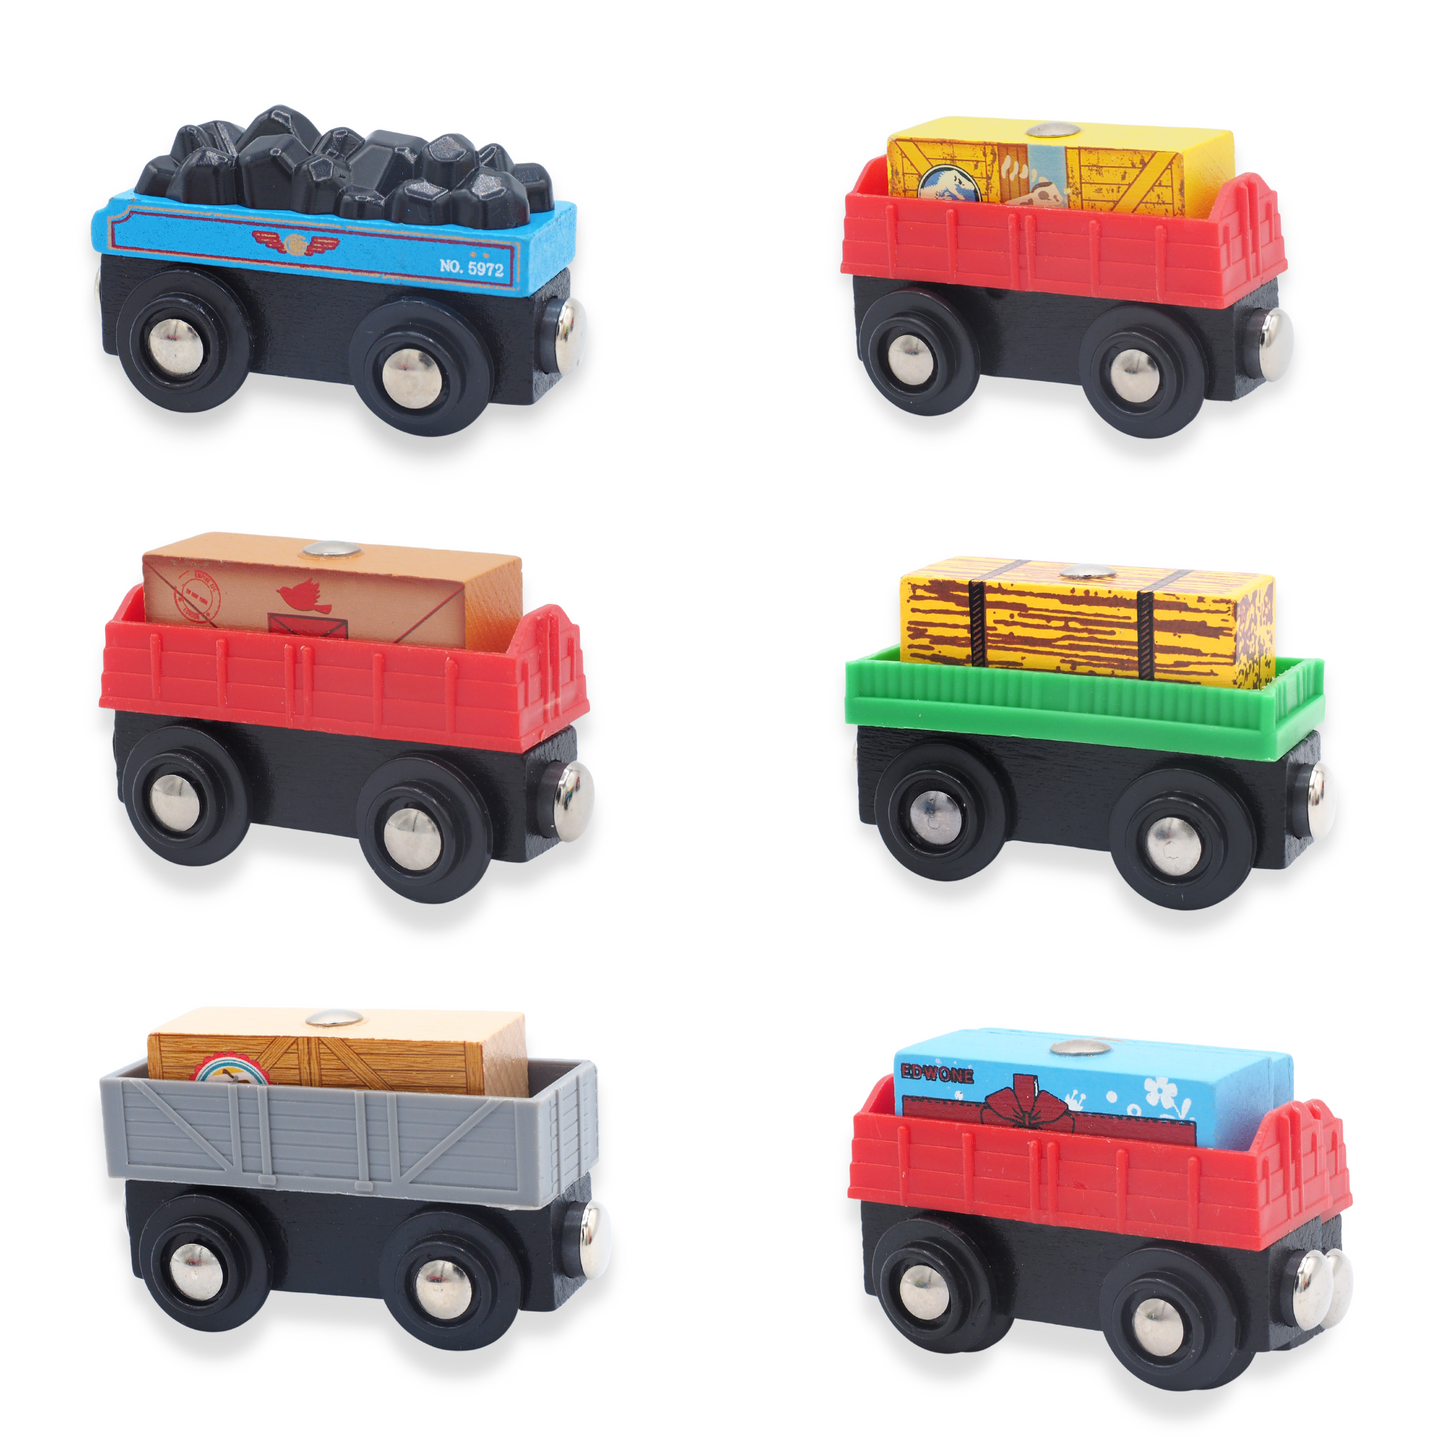 6 pack of Wooden Tenders for Wooden Train Tracks